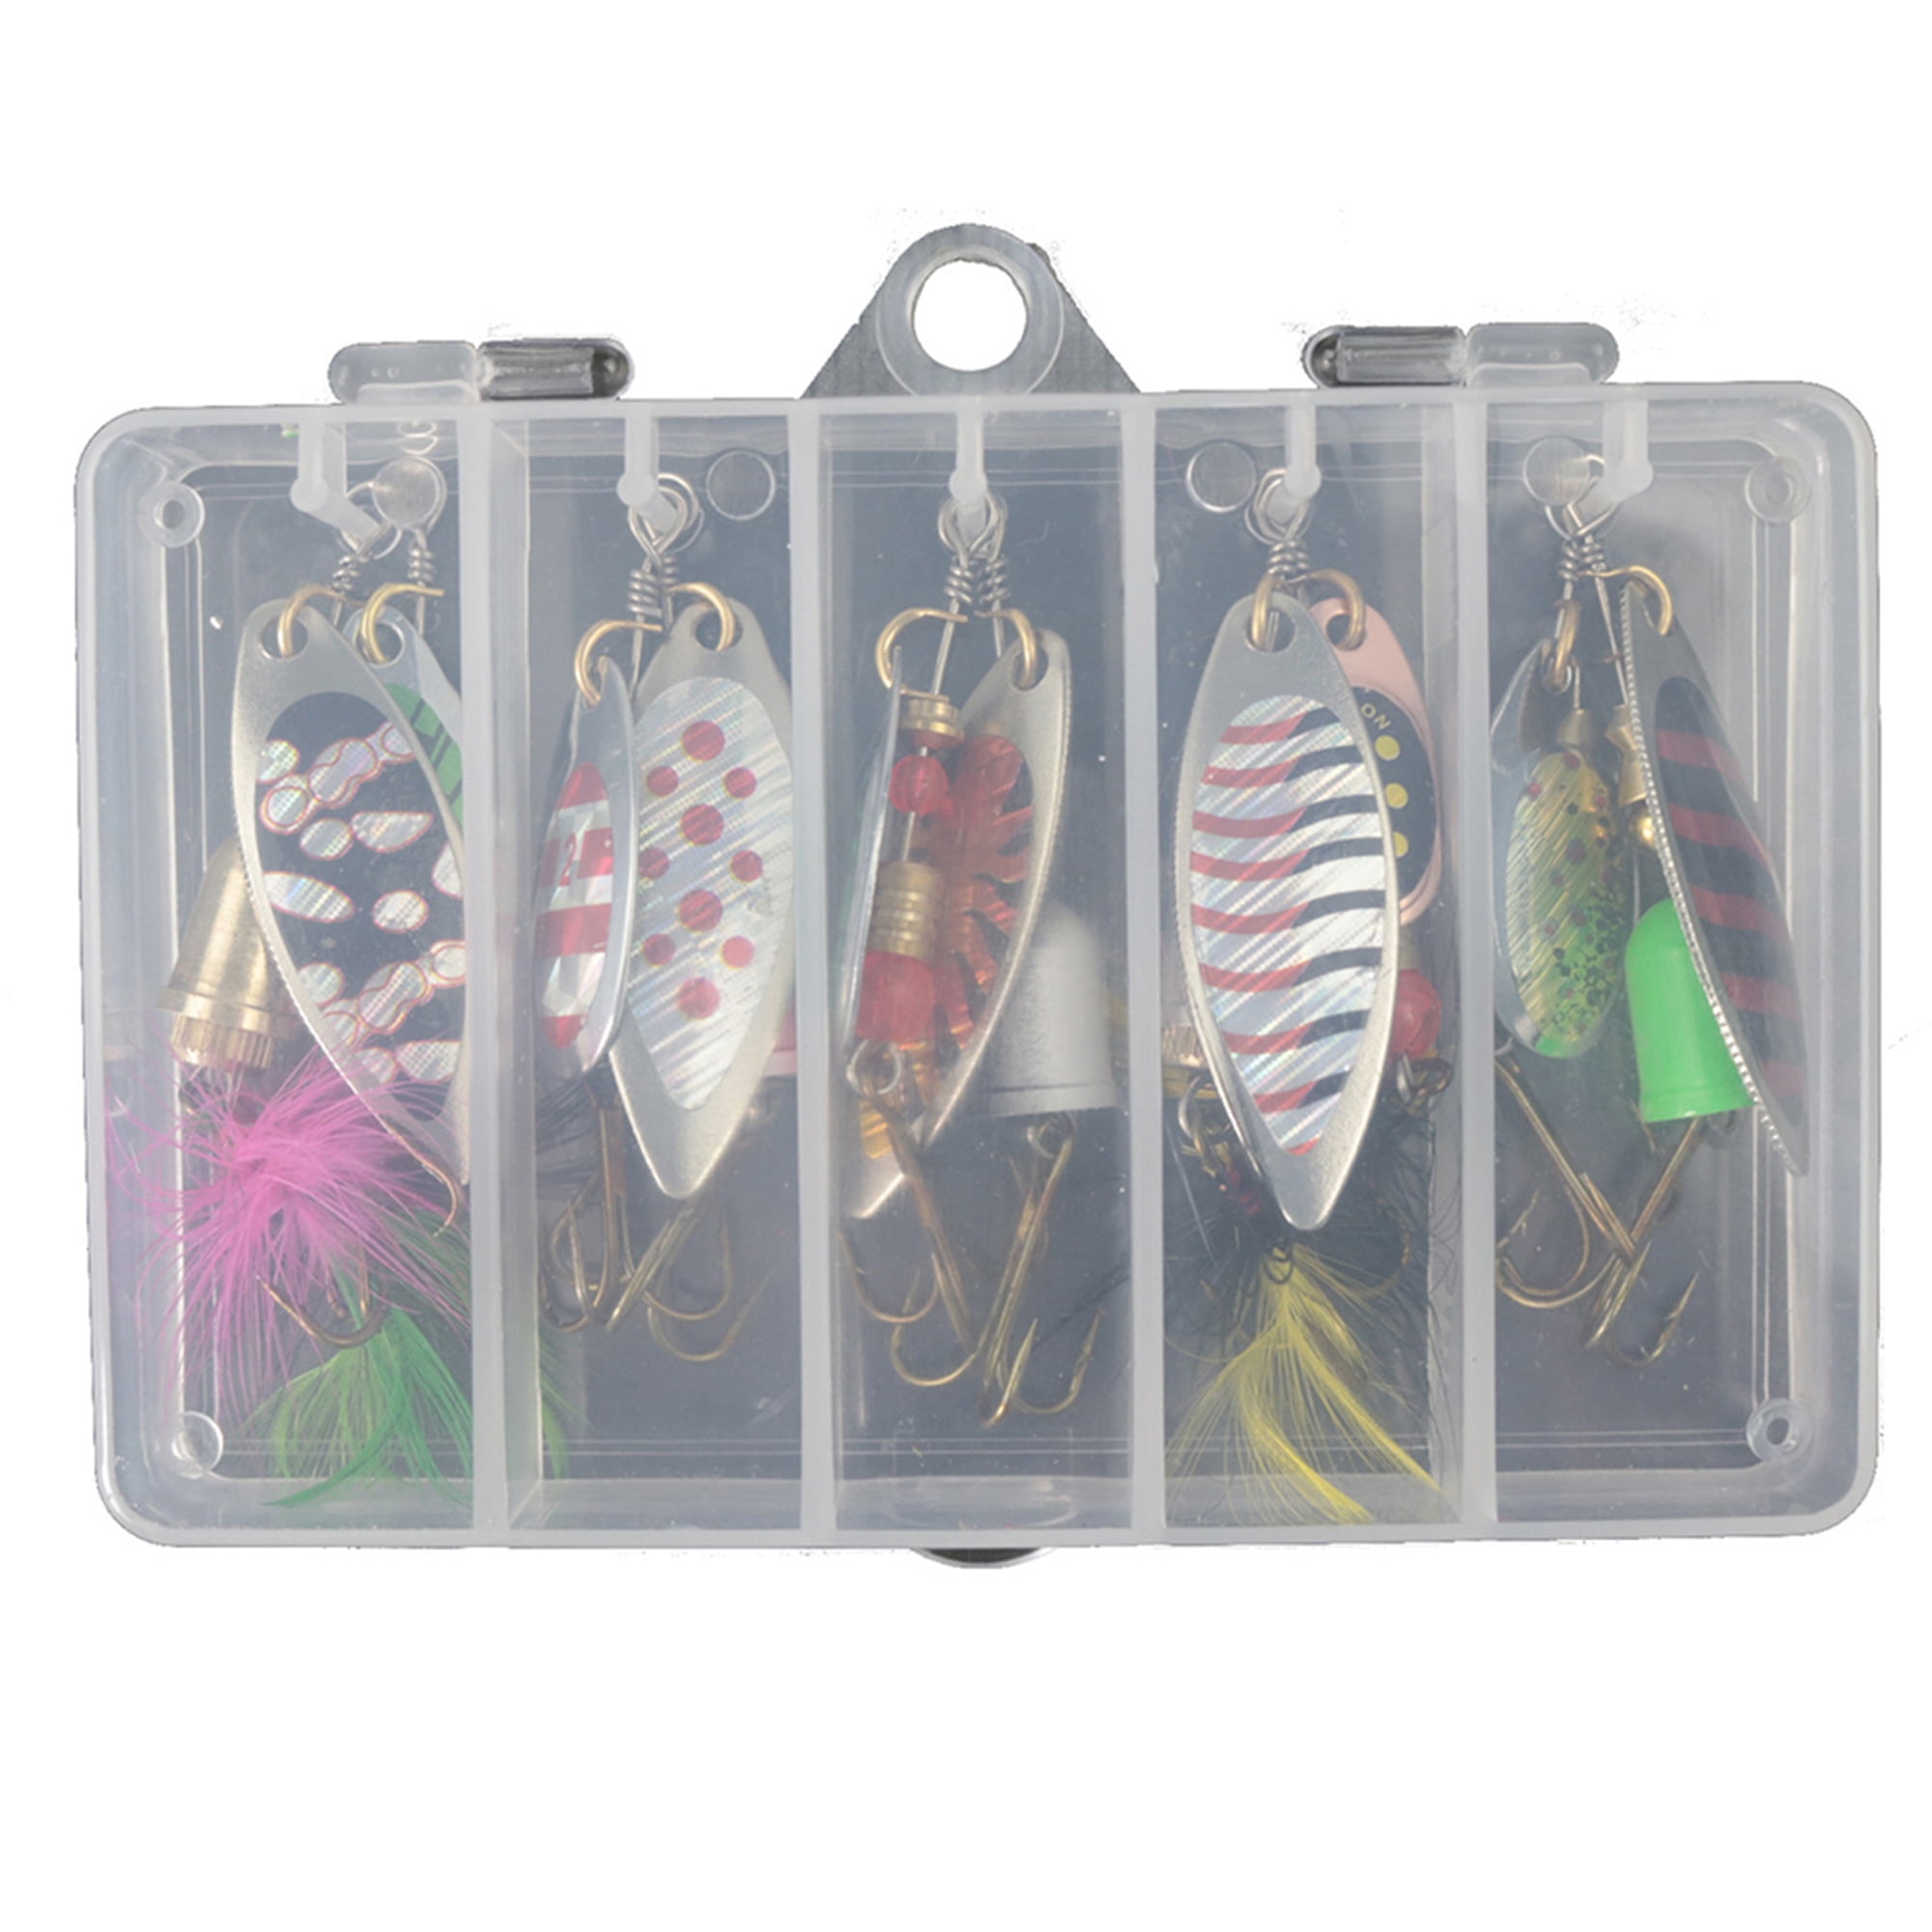 DODOING 10pcs Fishing Lures Spinnerbait for Bass Trout Salmon Walleye Hard  Metal Spinner Baits Kit with 2 Tackle Box 